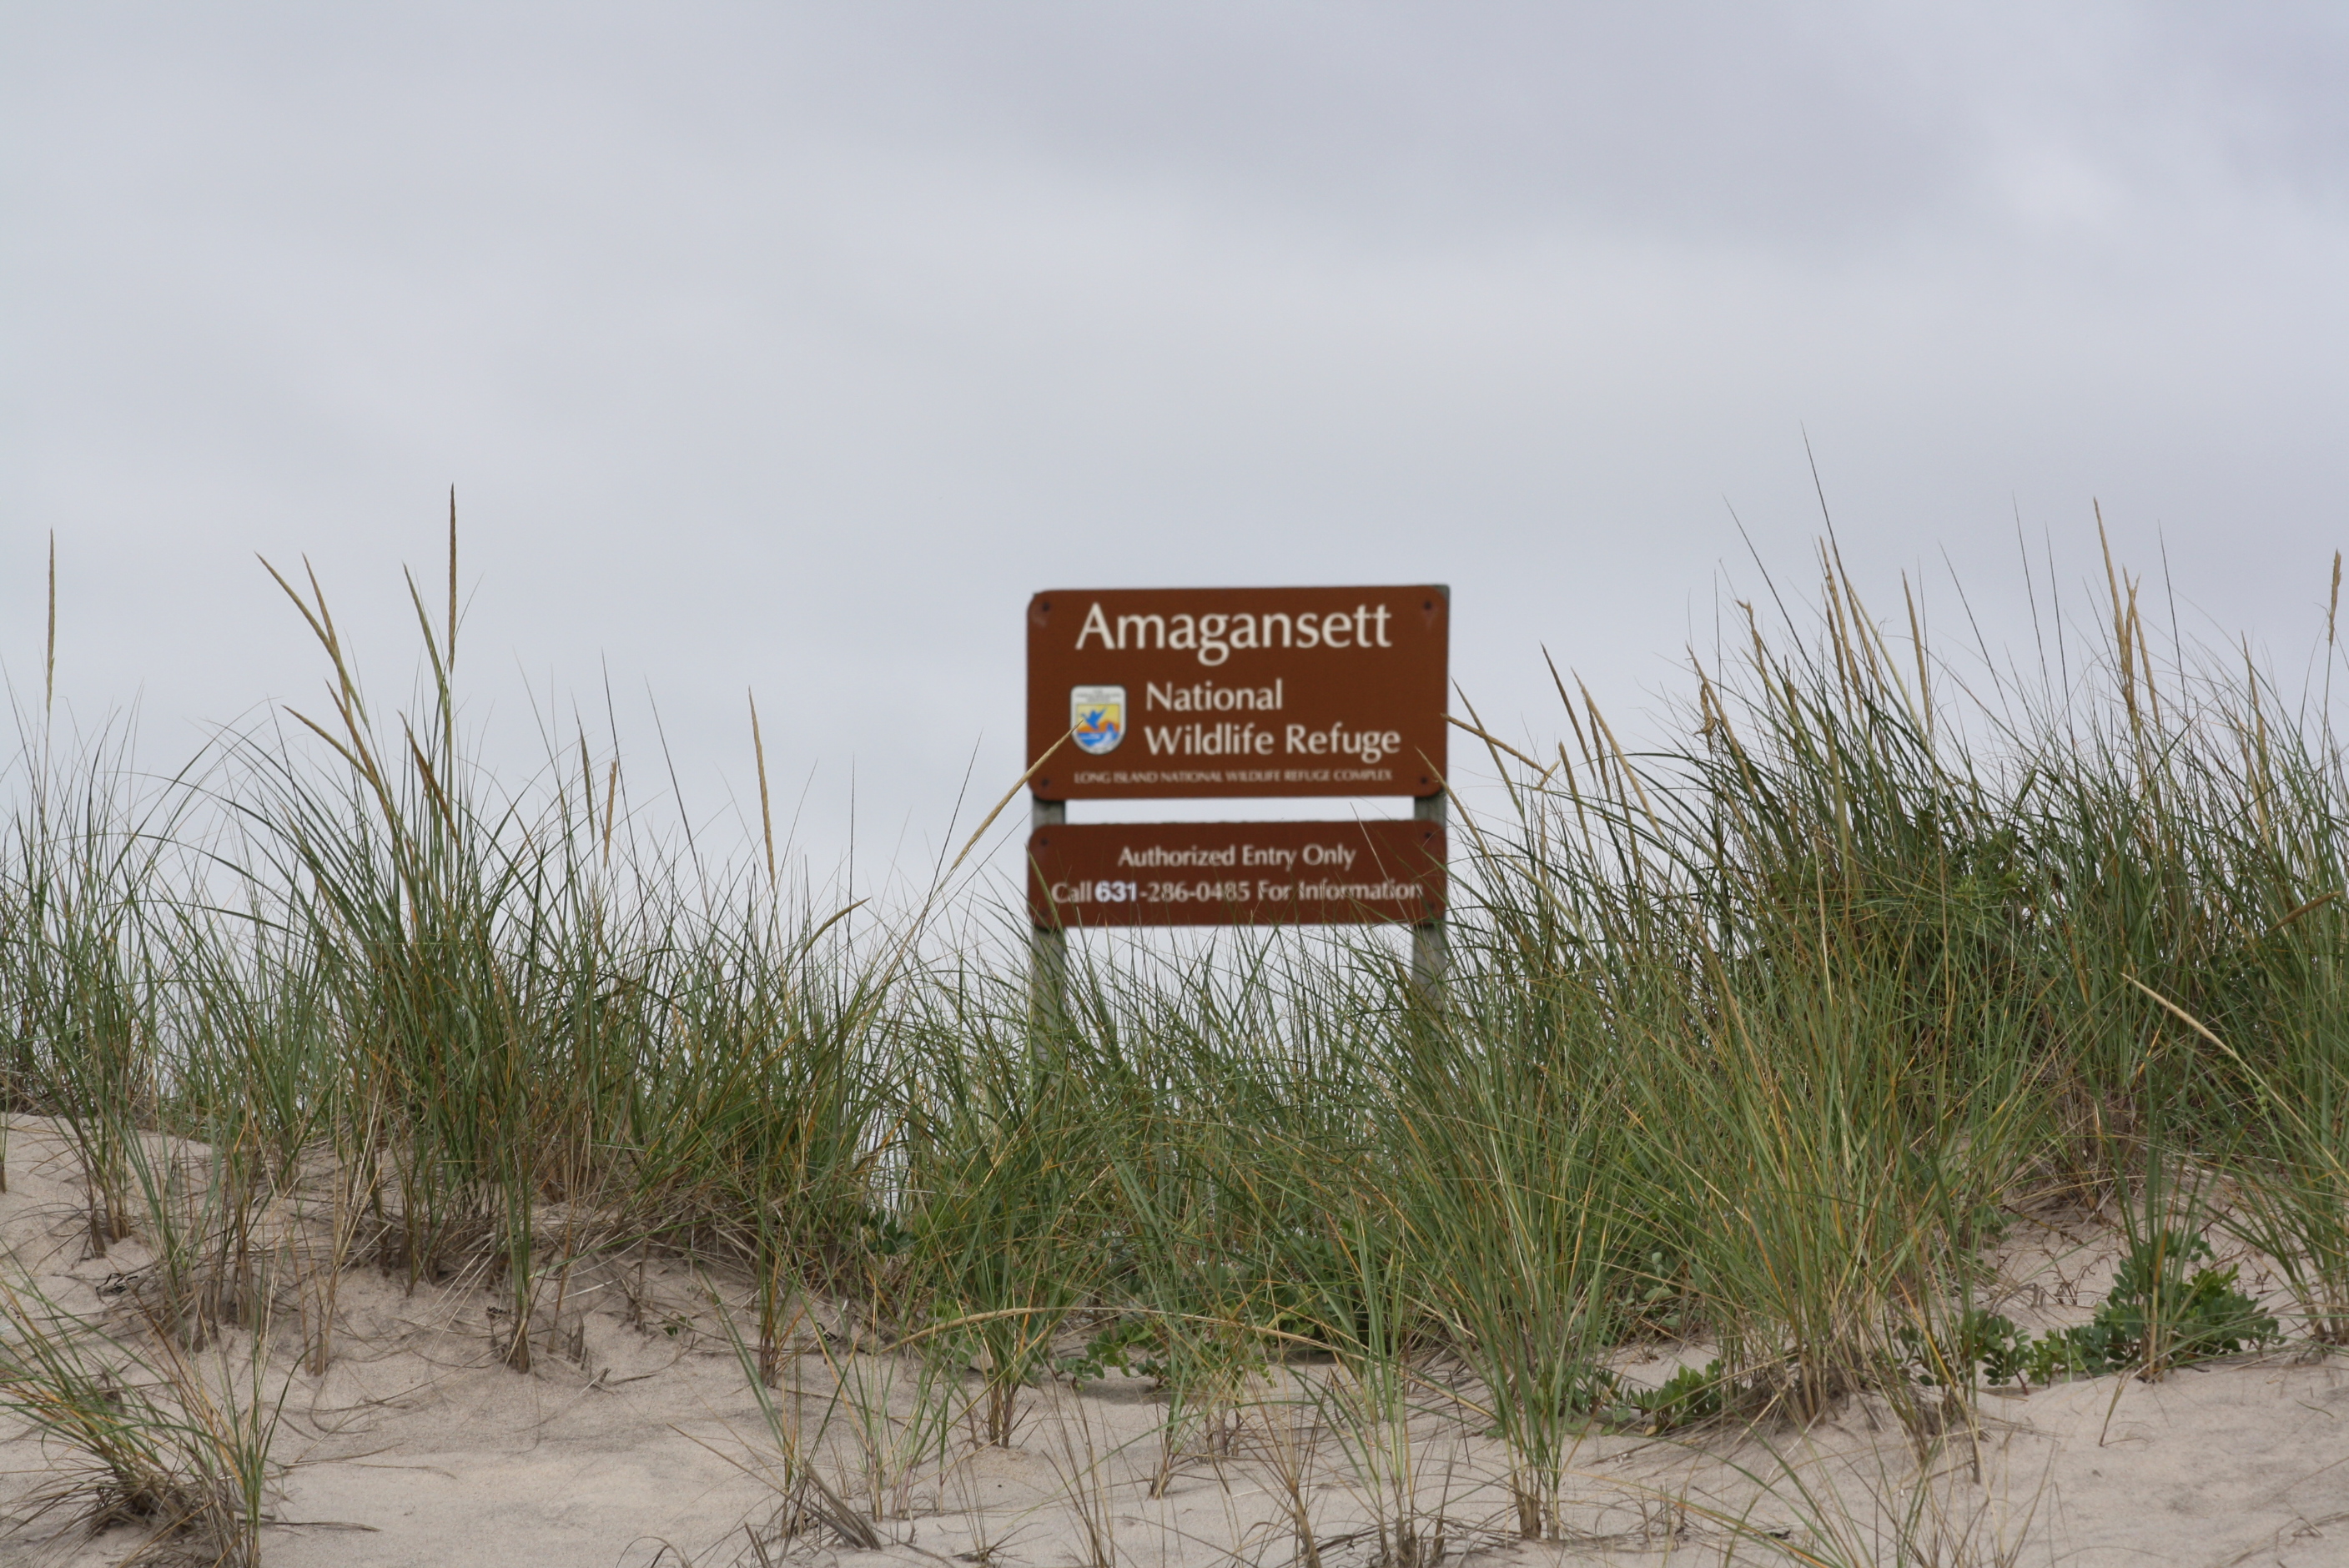 Amagansett sign rises from behind the dunes